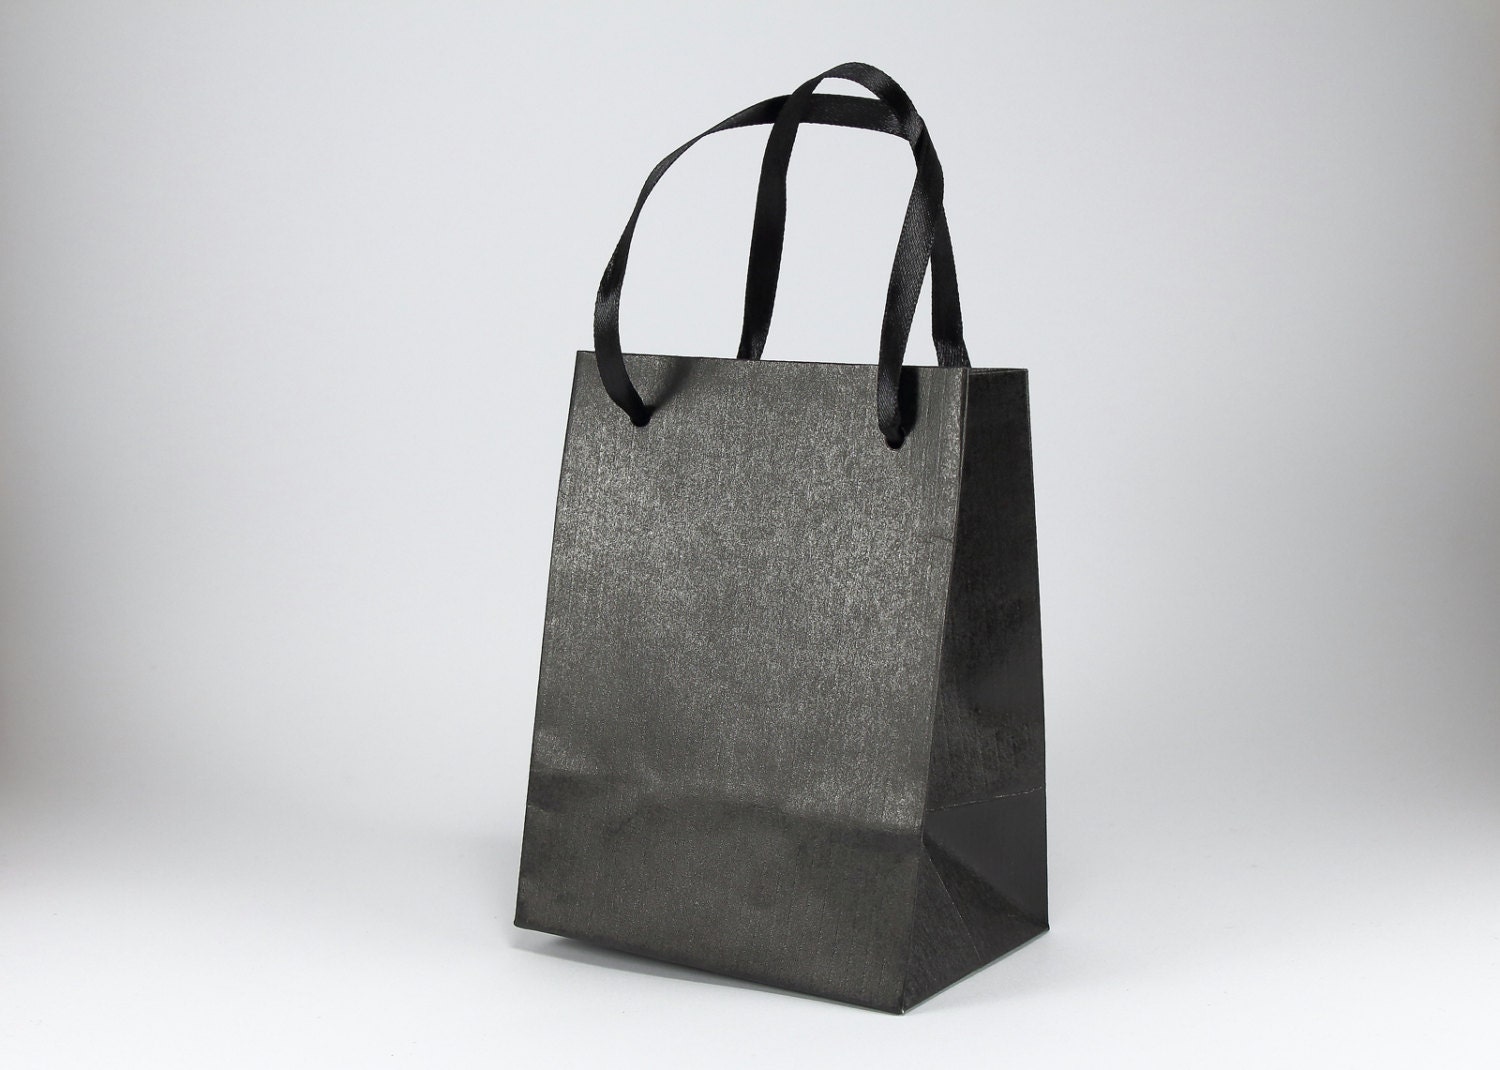 50 Extra Small BLACK Paper Gift Bags with Satin Handles